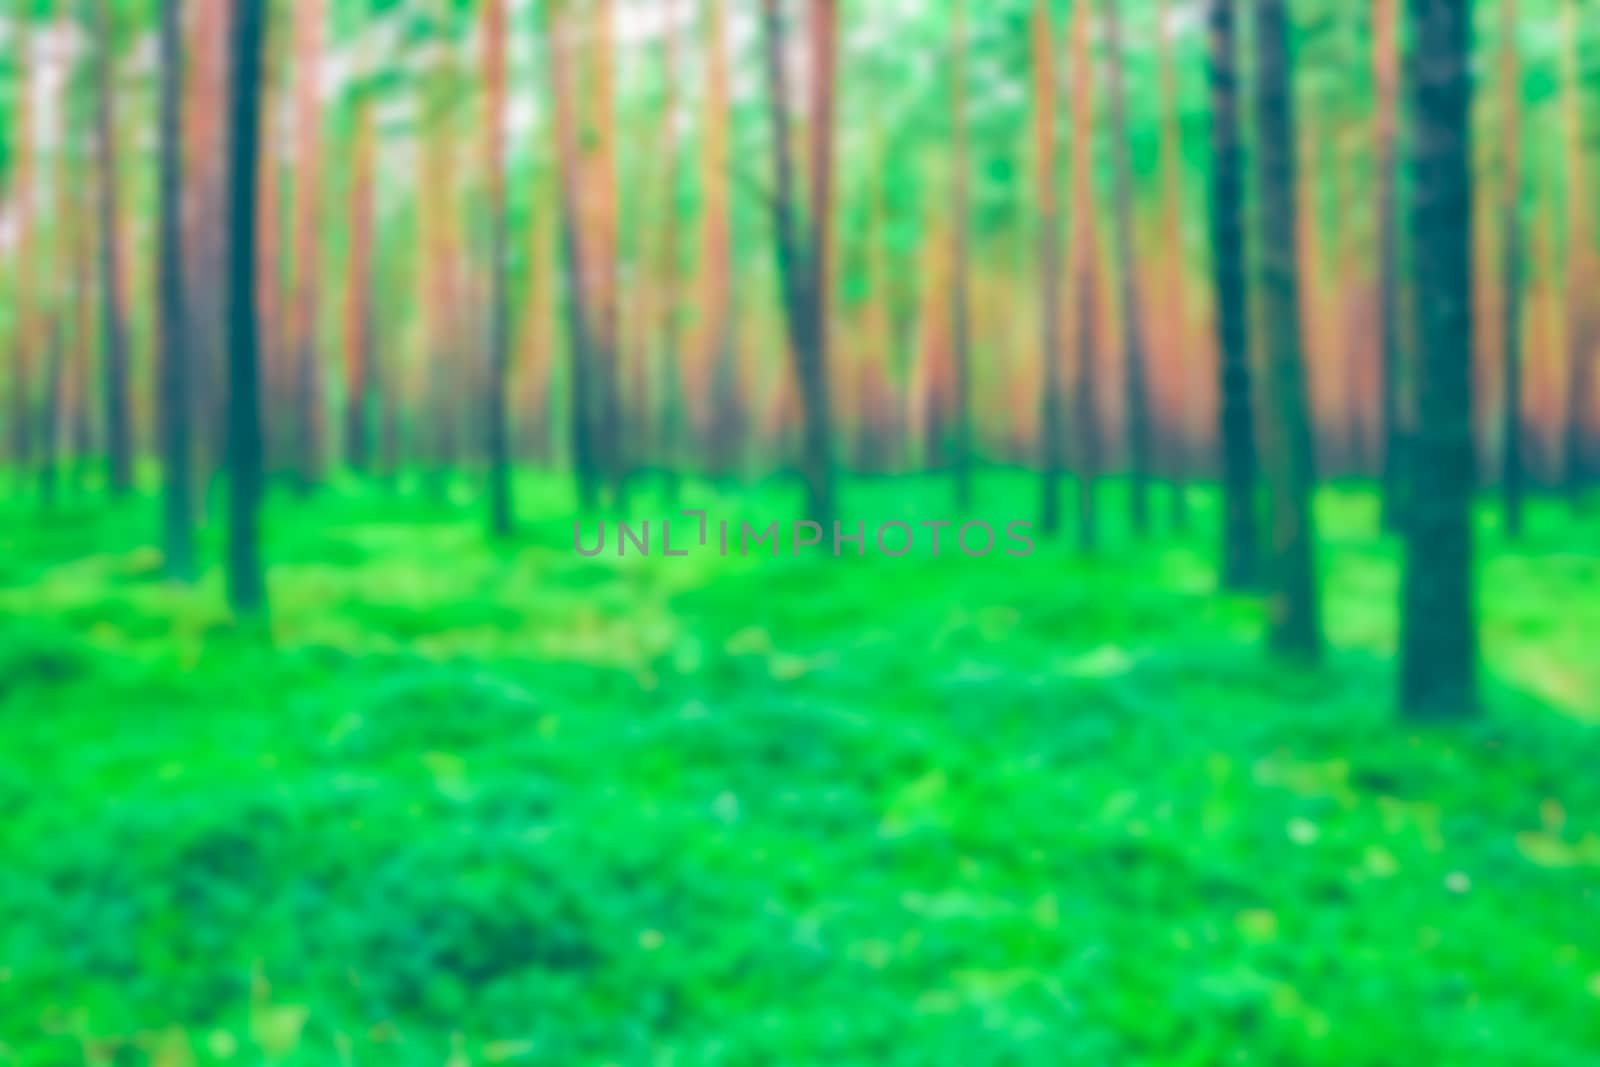 Green pine forest - blurred image by sengnsp